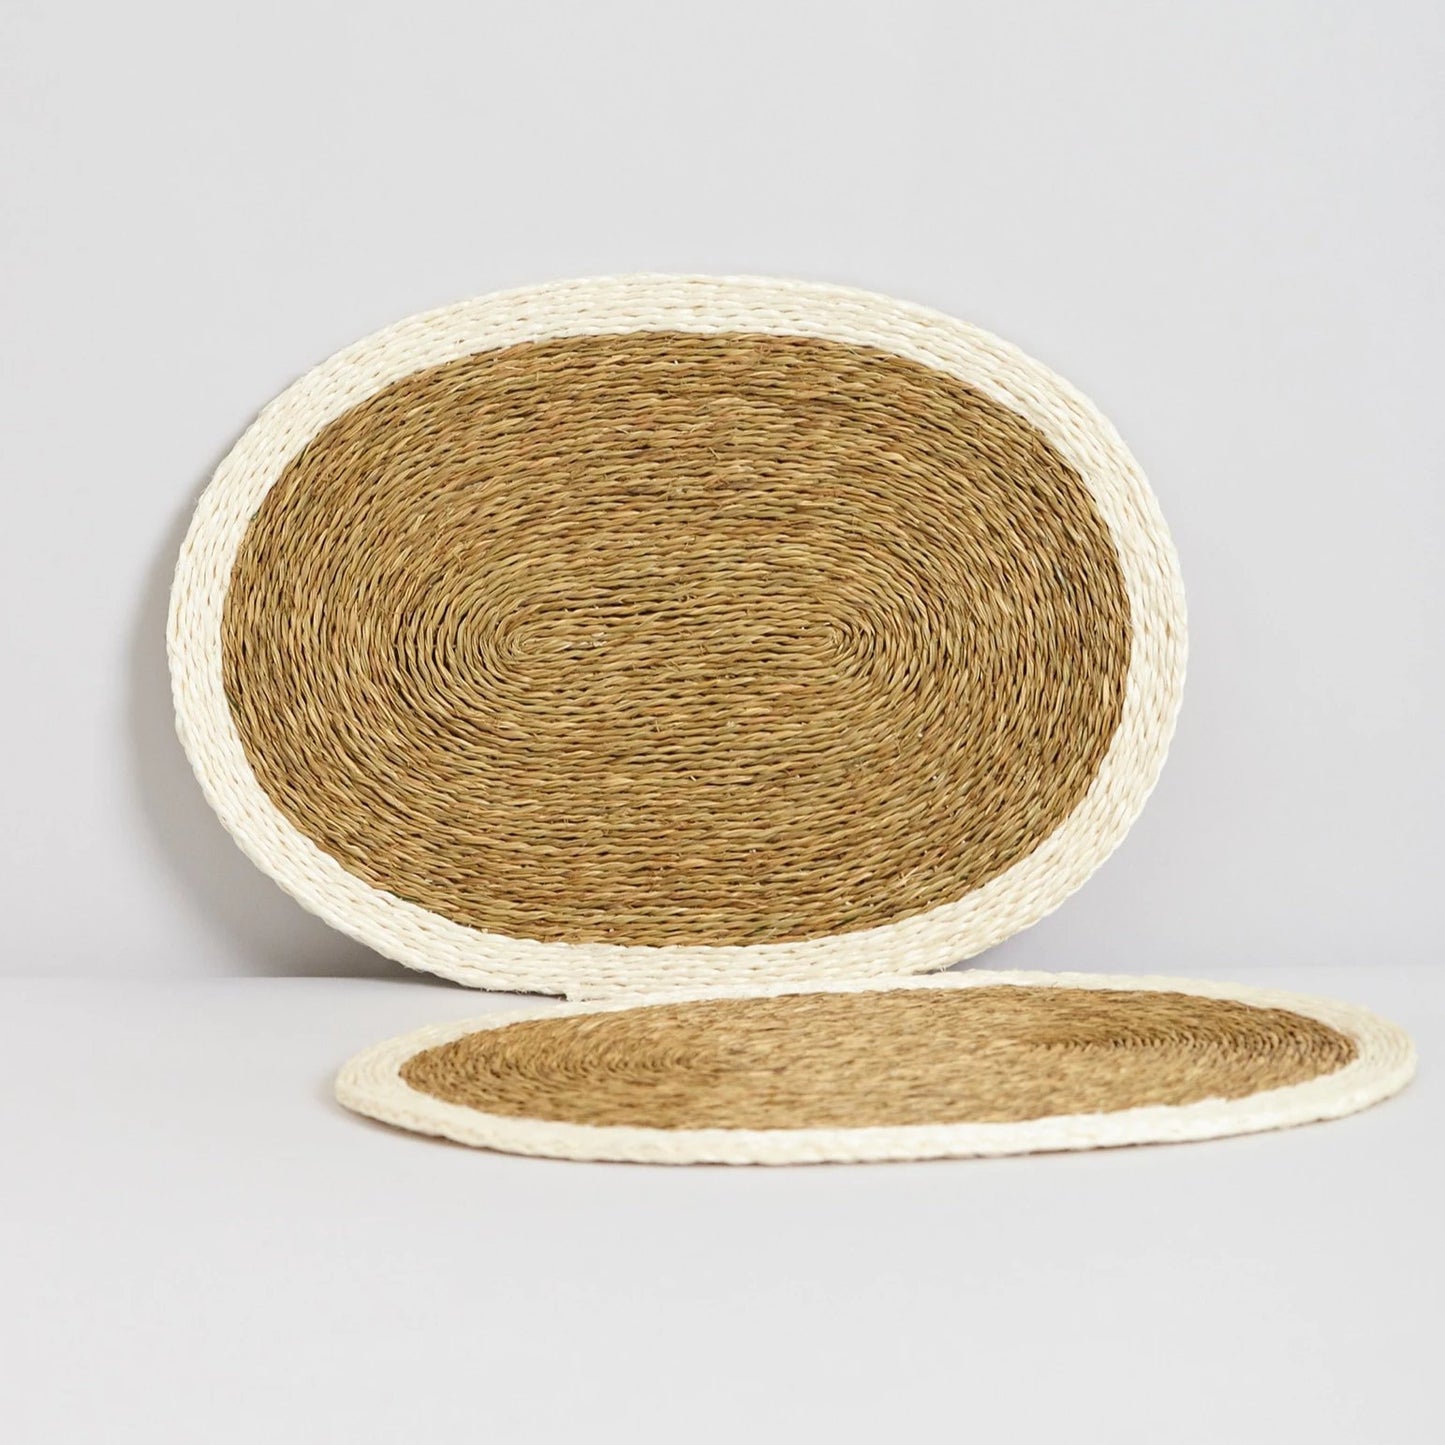 Large Forest Trim Oval Lutindzi Grass Placemat